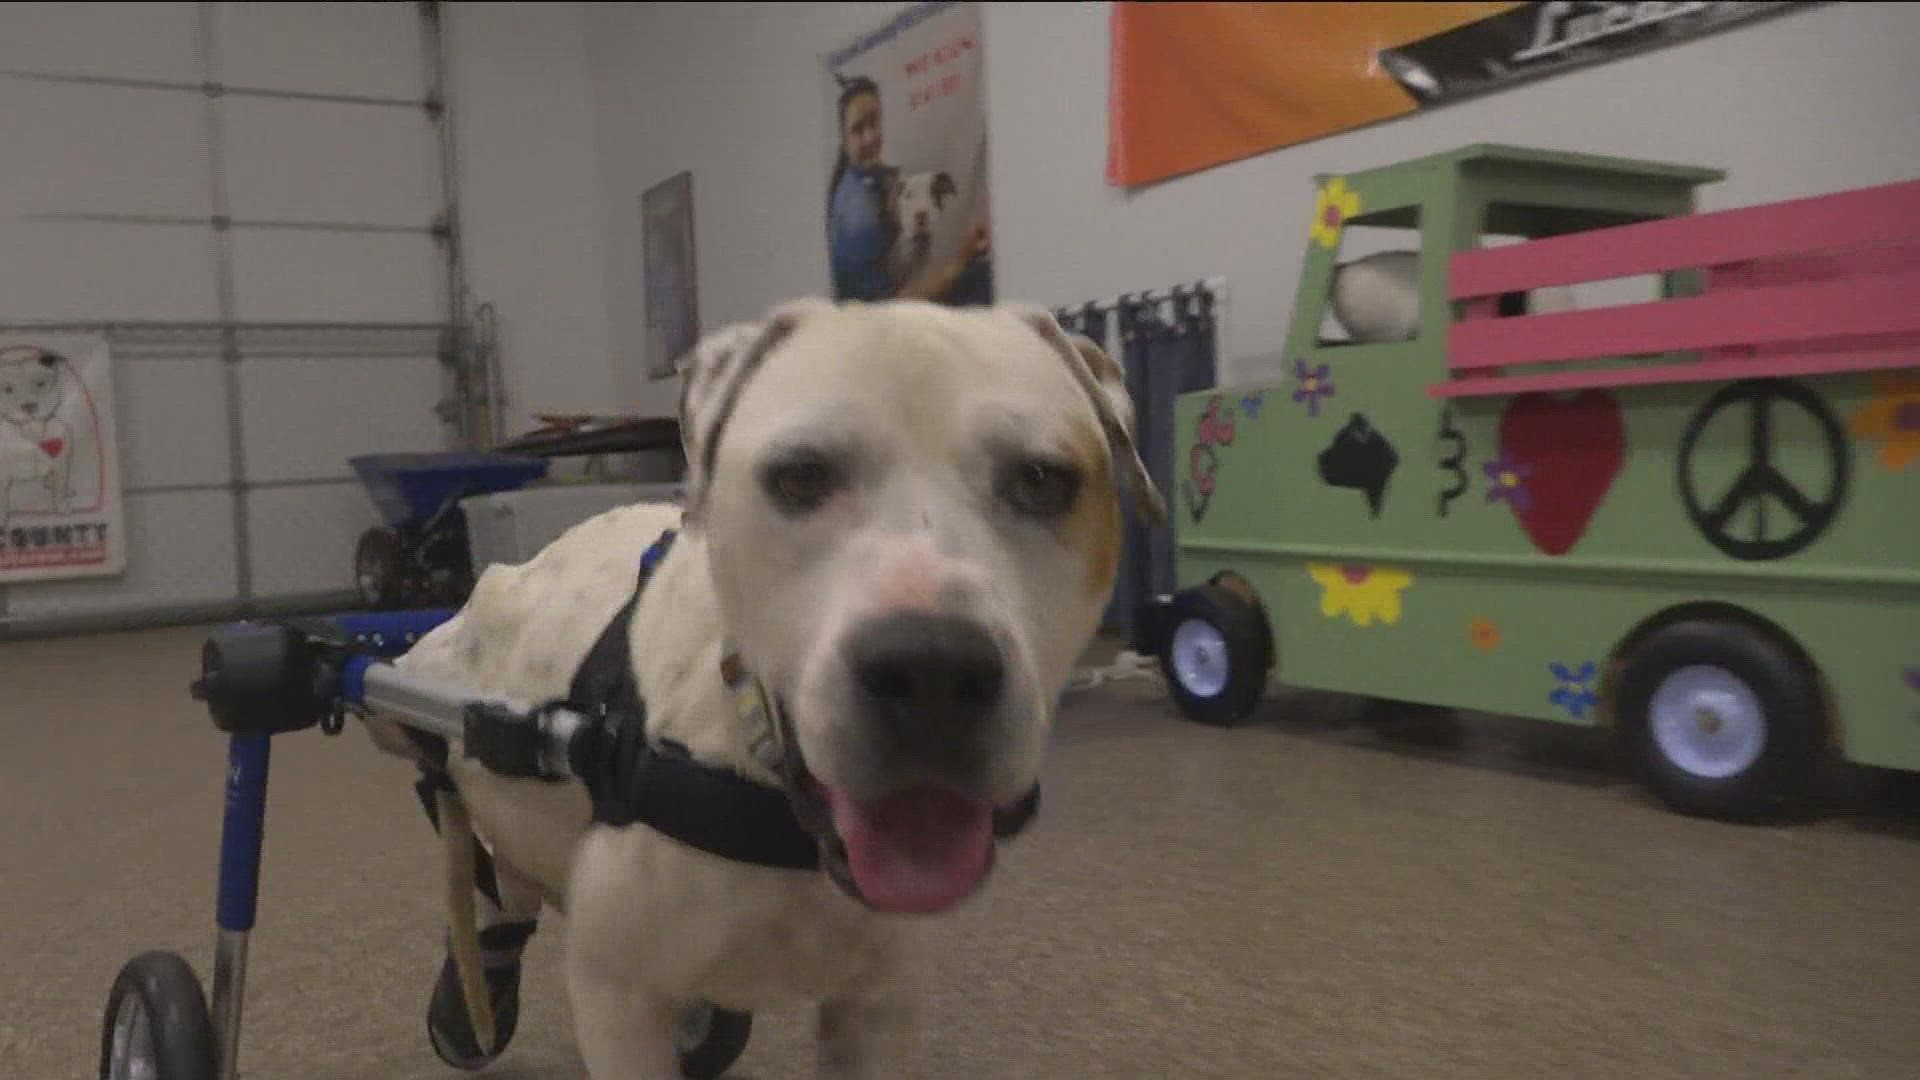 Follow Roy's journey from Texas to Toledo, and to recovery.